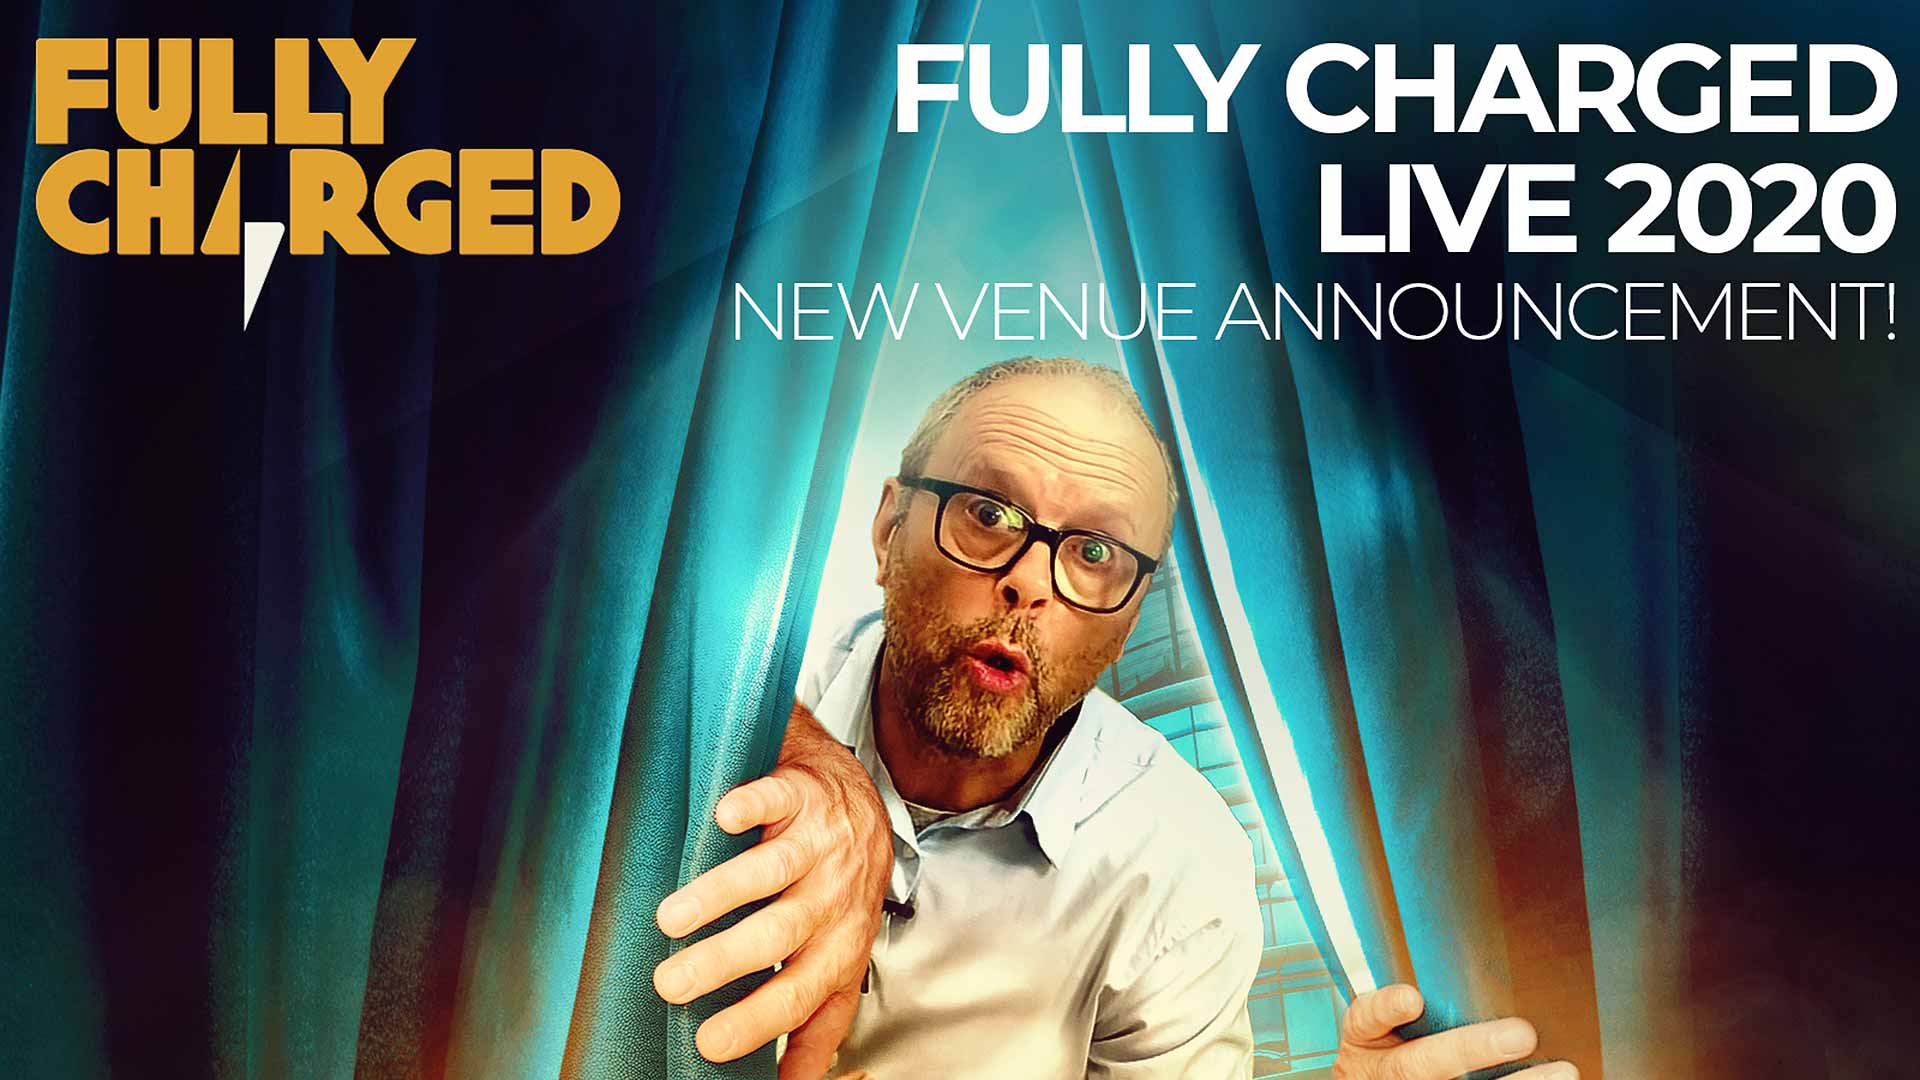 Fully Charged Live Farnborough 2020